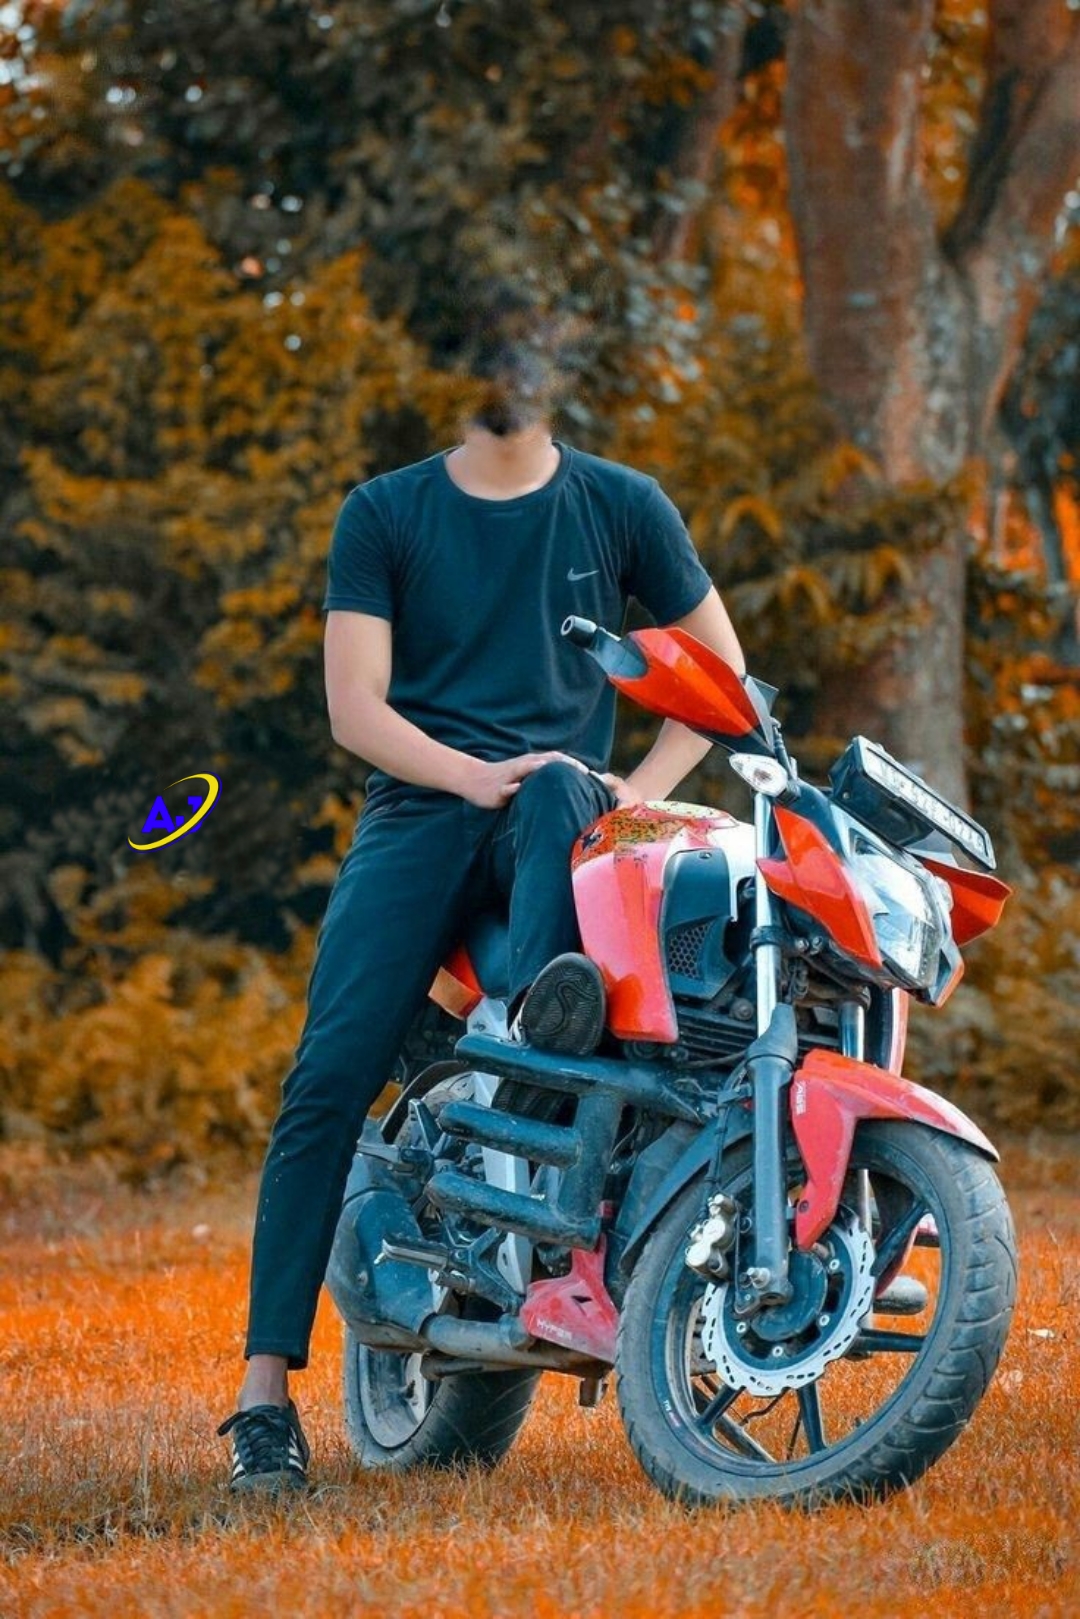 200+ KTM Bike Photo Editing Background Images Hd | 2022 | New Cb Backgrounds for Boys Hd